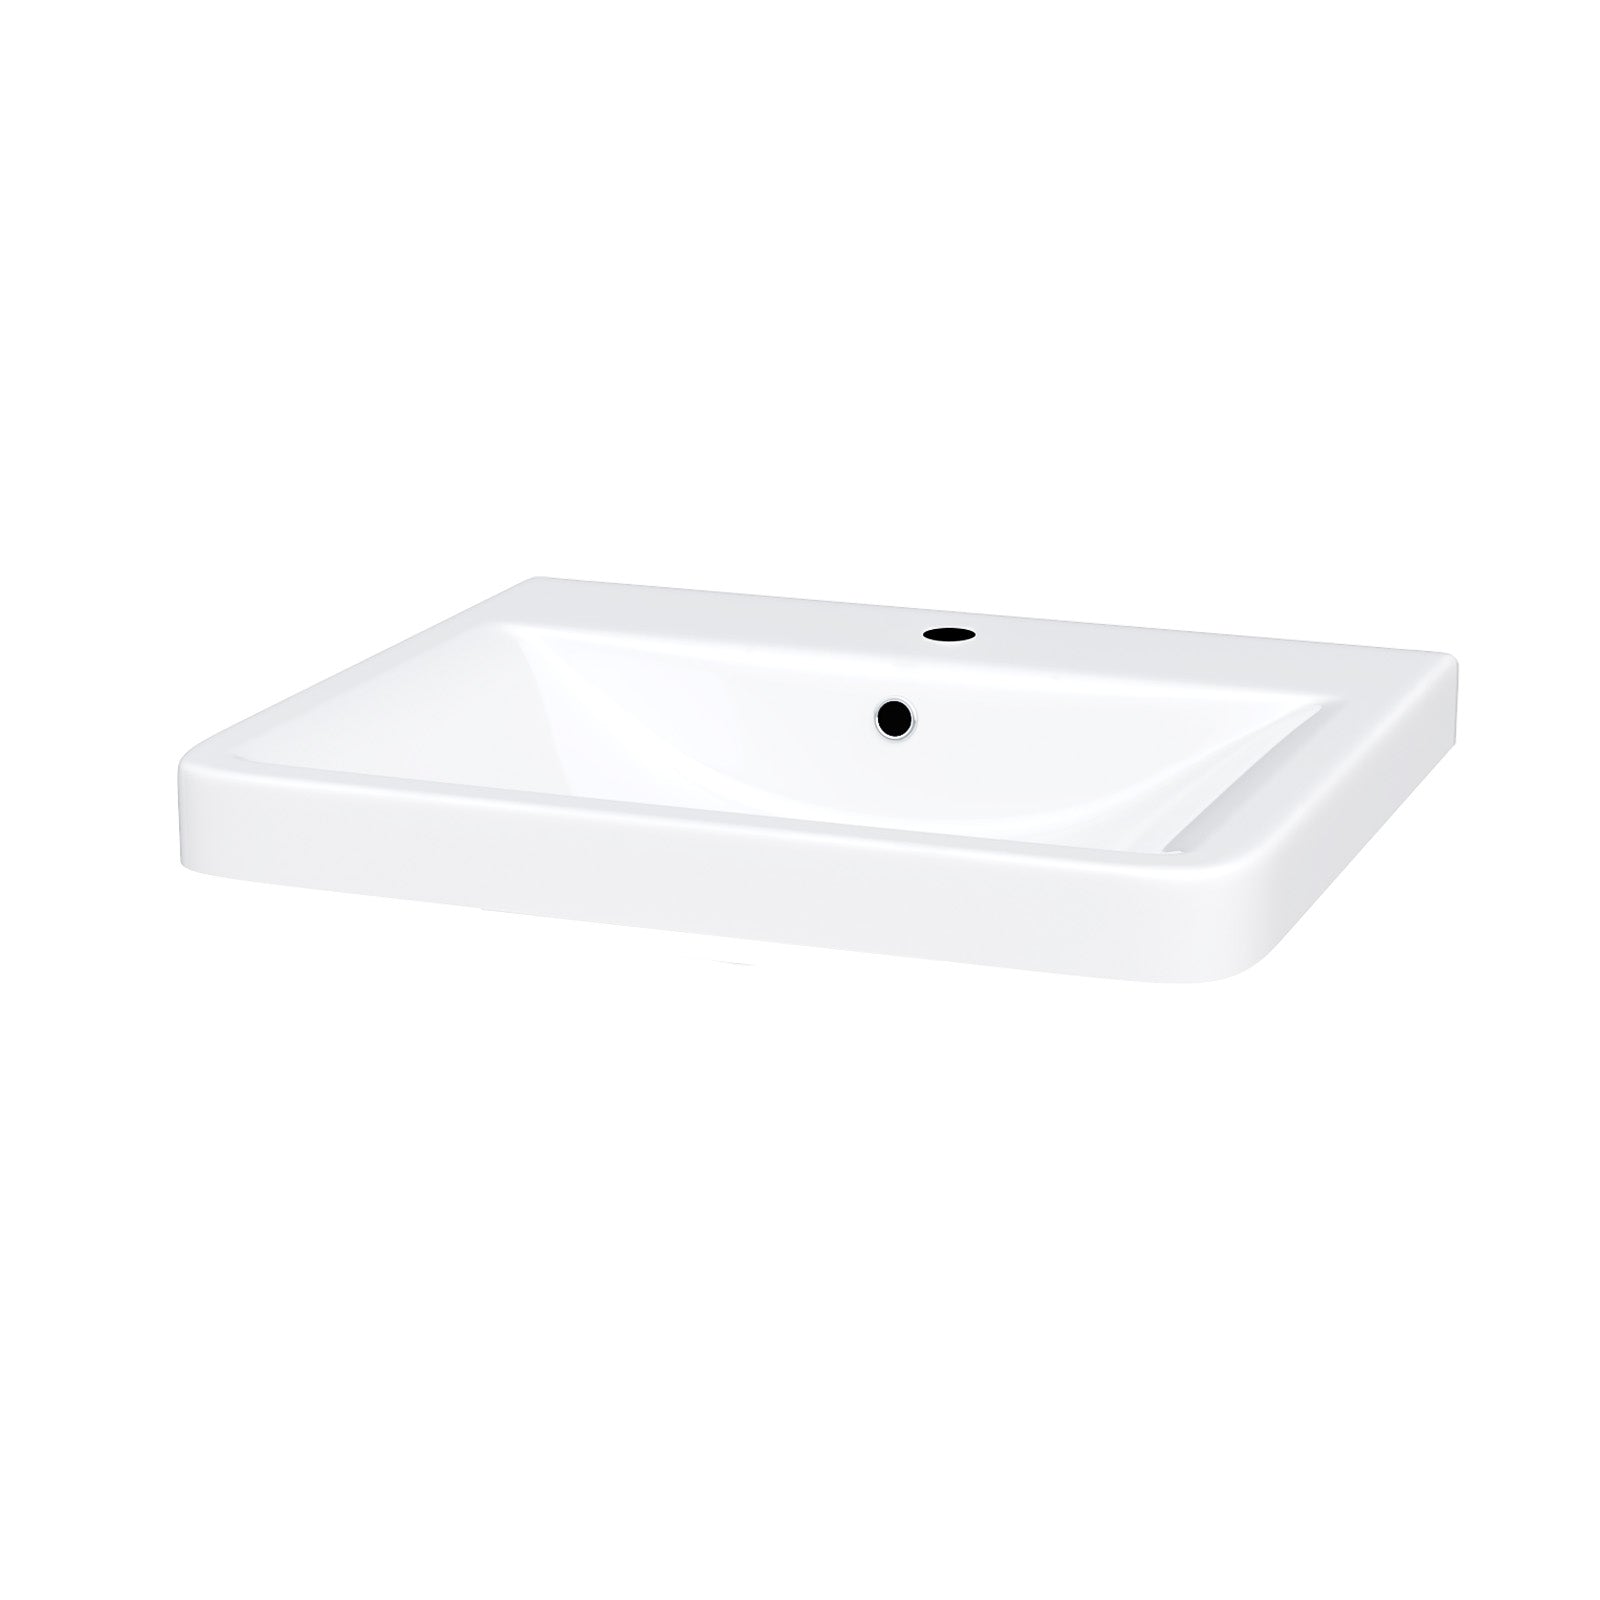 Merton 500mm Cloakroom Countertop Rectangular Basin Sink White with 1 Tap Hole